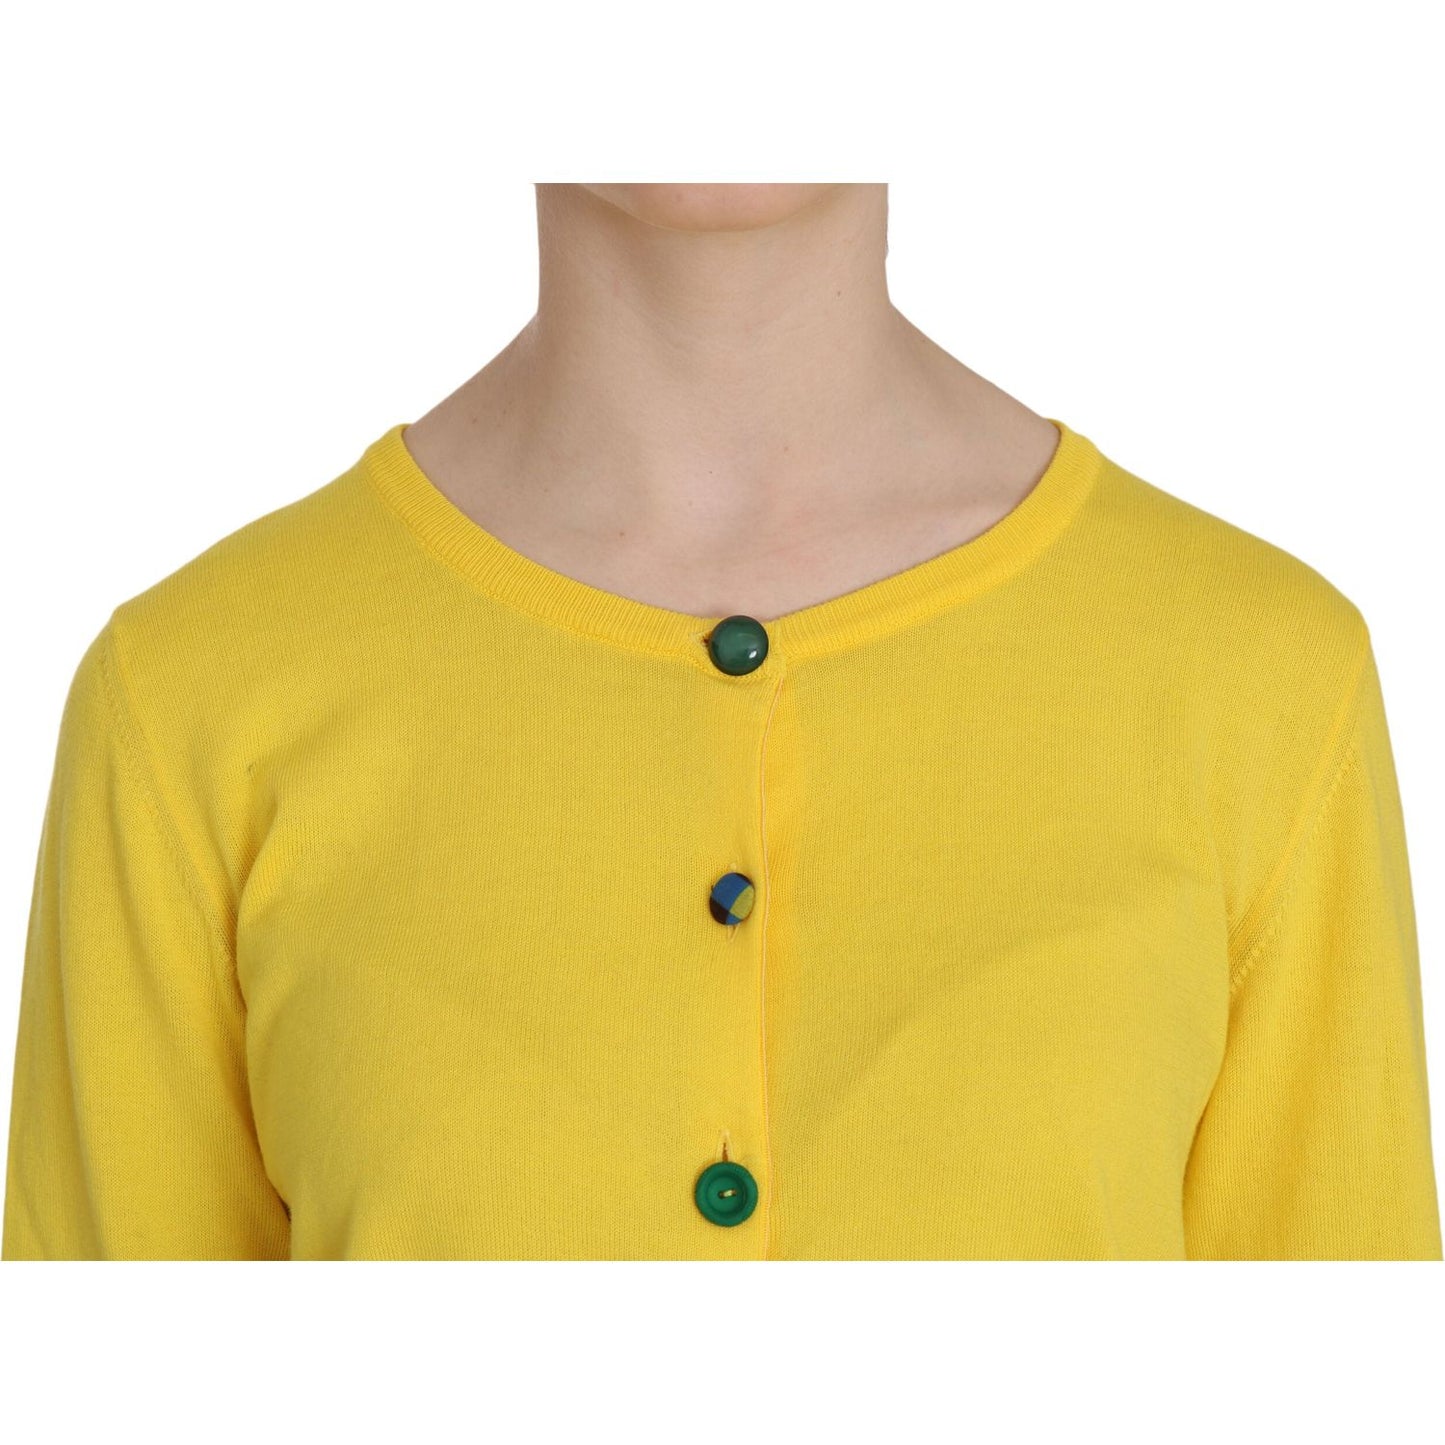 Jucca Radiant Yellow Cotton Sweater yellow-cotton-buttonfront-long-sleeve-sweater IMG_0021-scaled-df2836ad-c9e.jpg